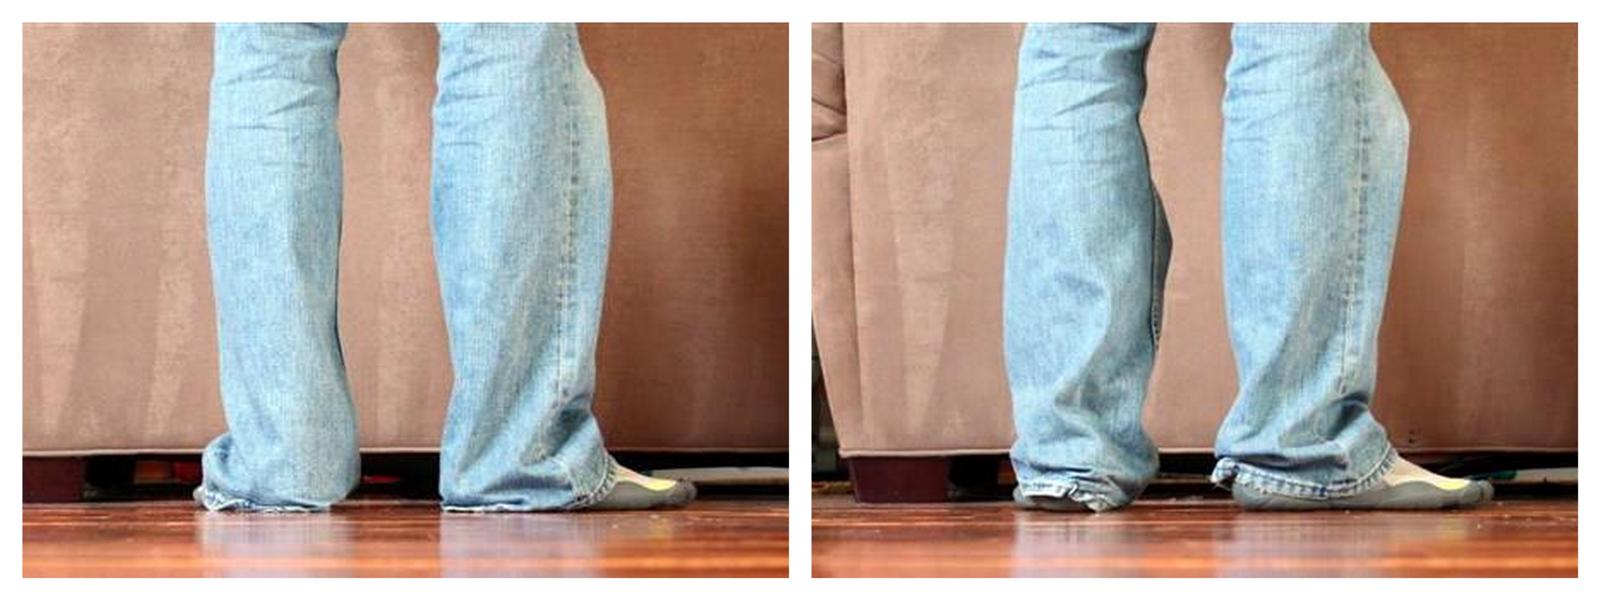 A side-by-side comparison of me wearing jeans with my KSO Vibram Five Fingers.  These jeans would be the right length for normal footwear, but with KSOs, they drag behind the heels.  By using an S-Biner, I'm able to keep my pants off the ground!